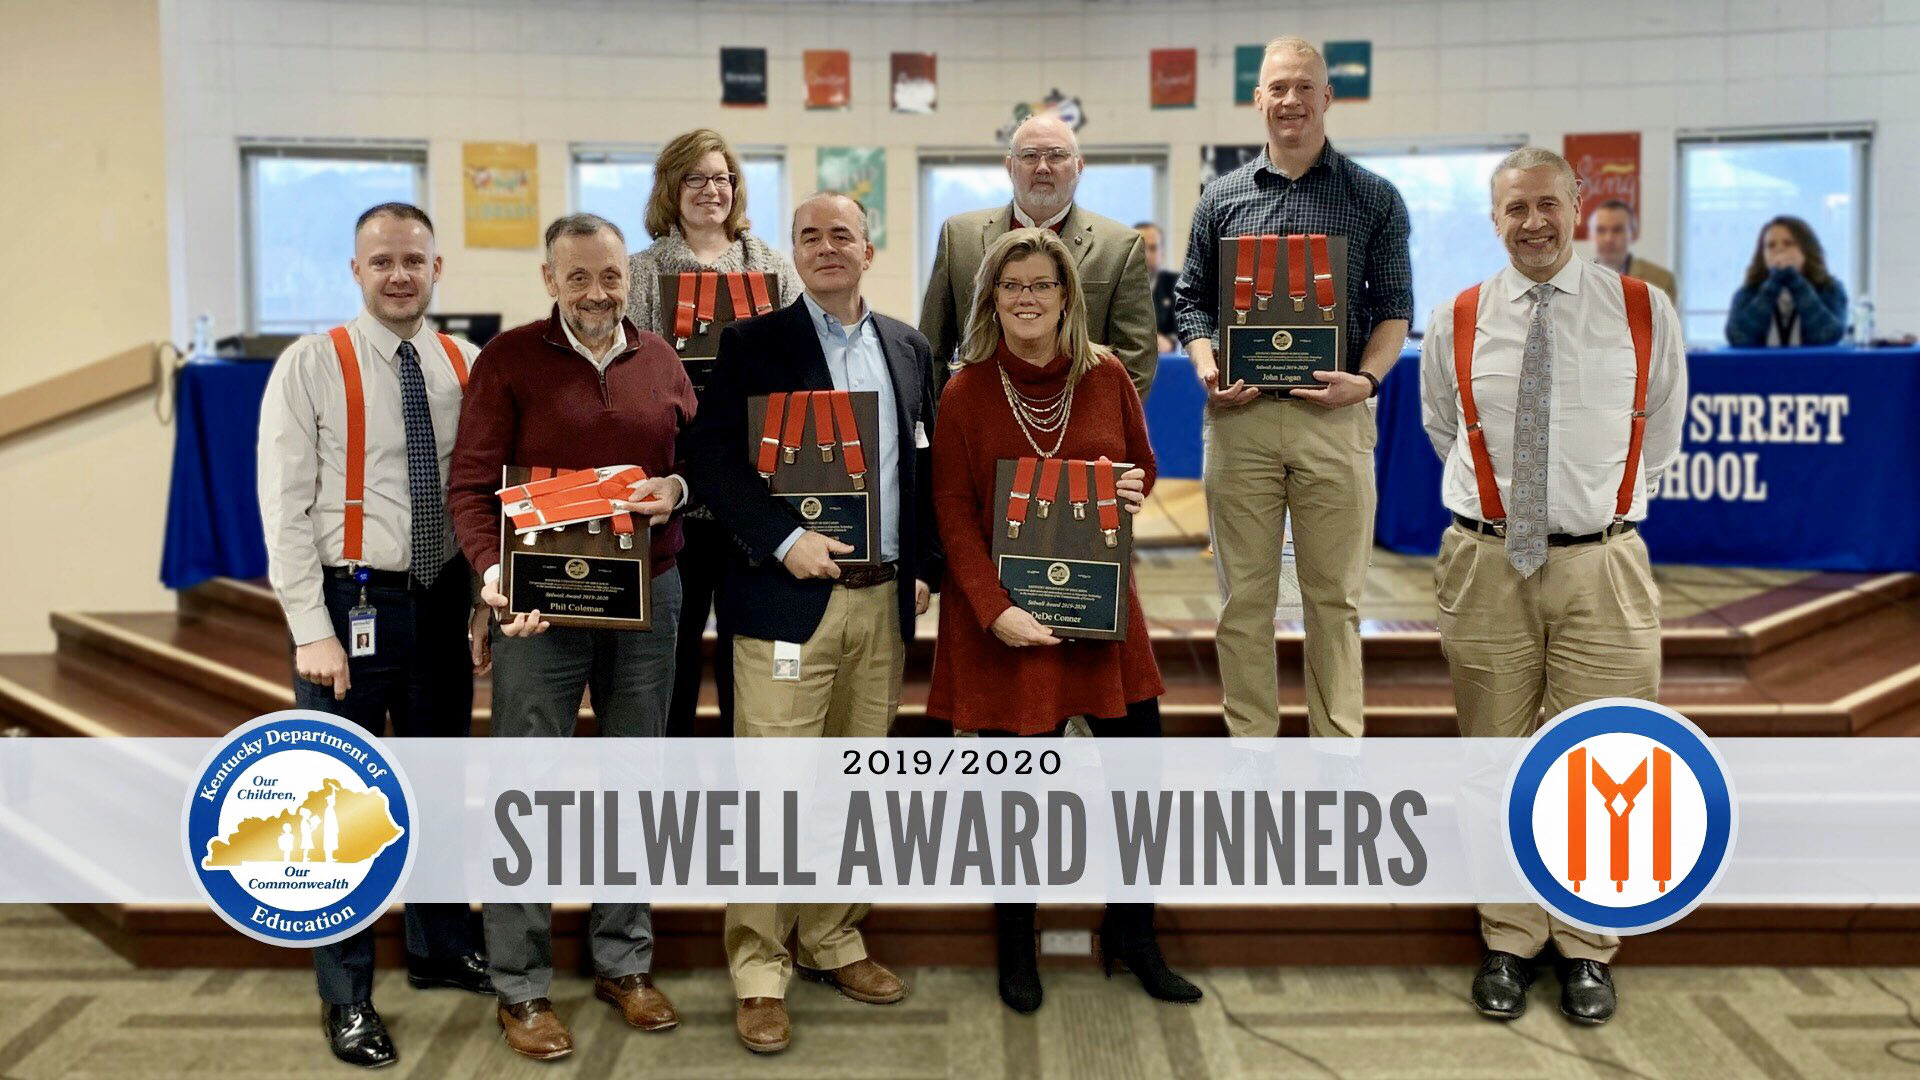 The Kentucky Department of Education (KDE) recognized seven employees from the Office of Education Technology for their dedication and support of education technology by selecting them as recipients of the 2019-2020 Stilwell Award.